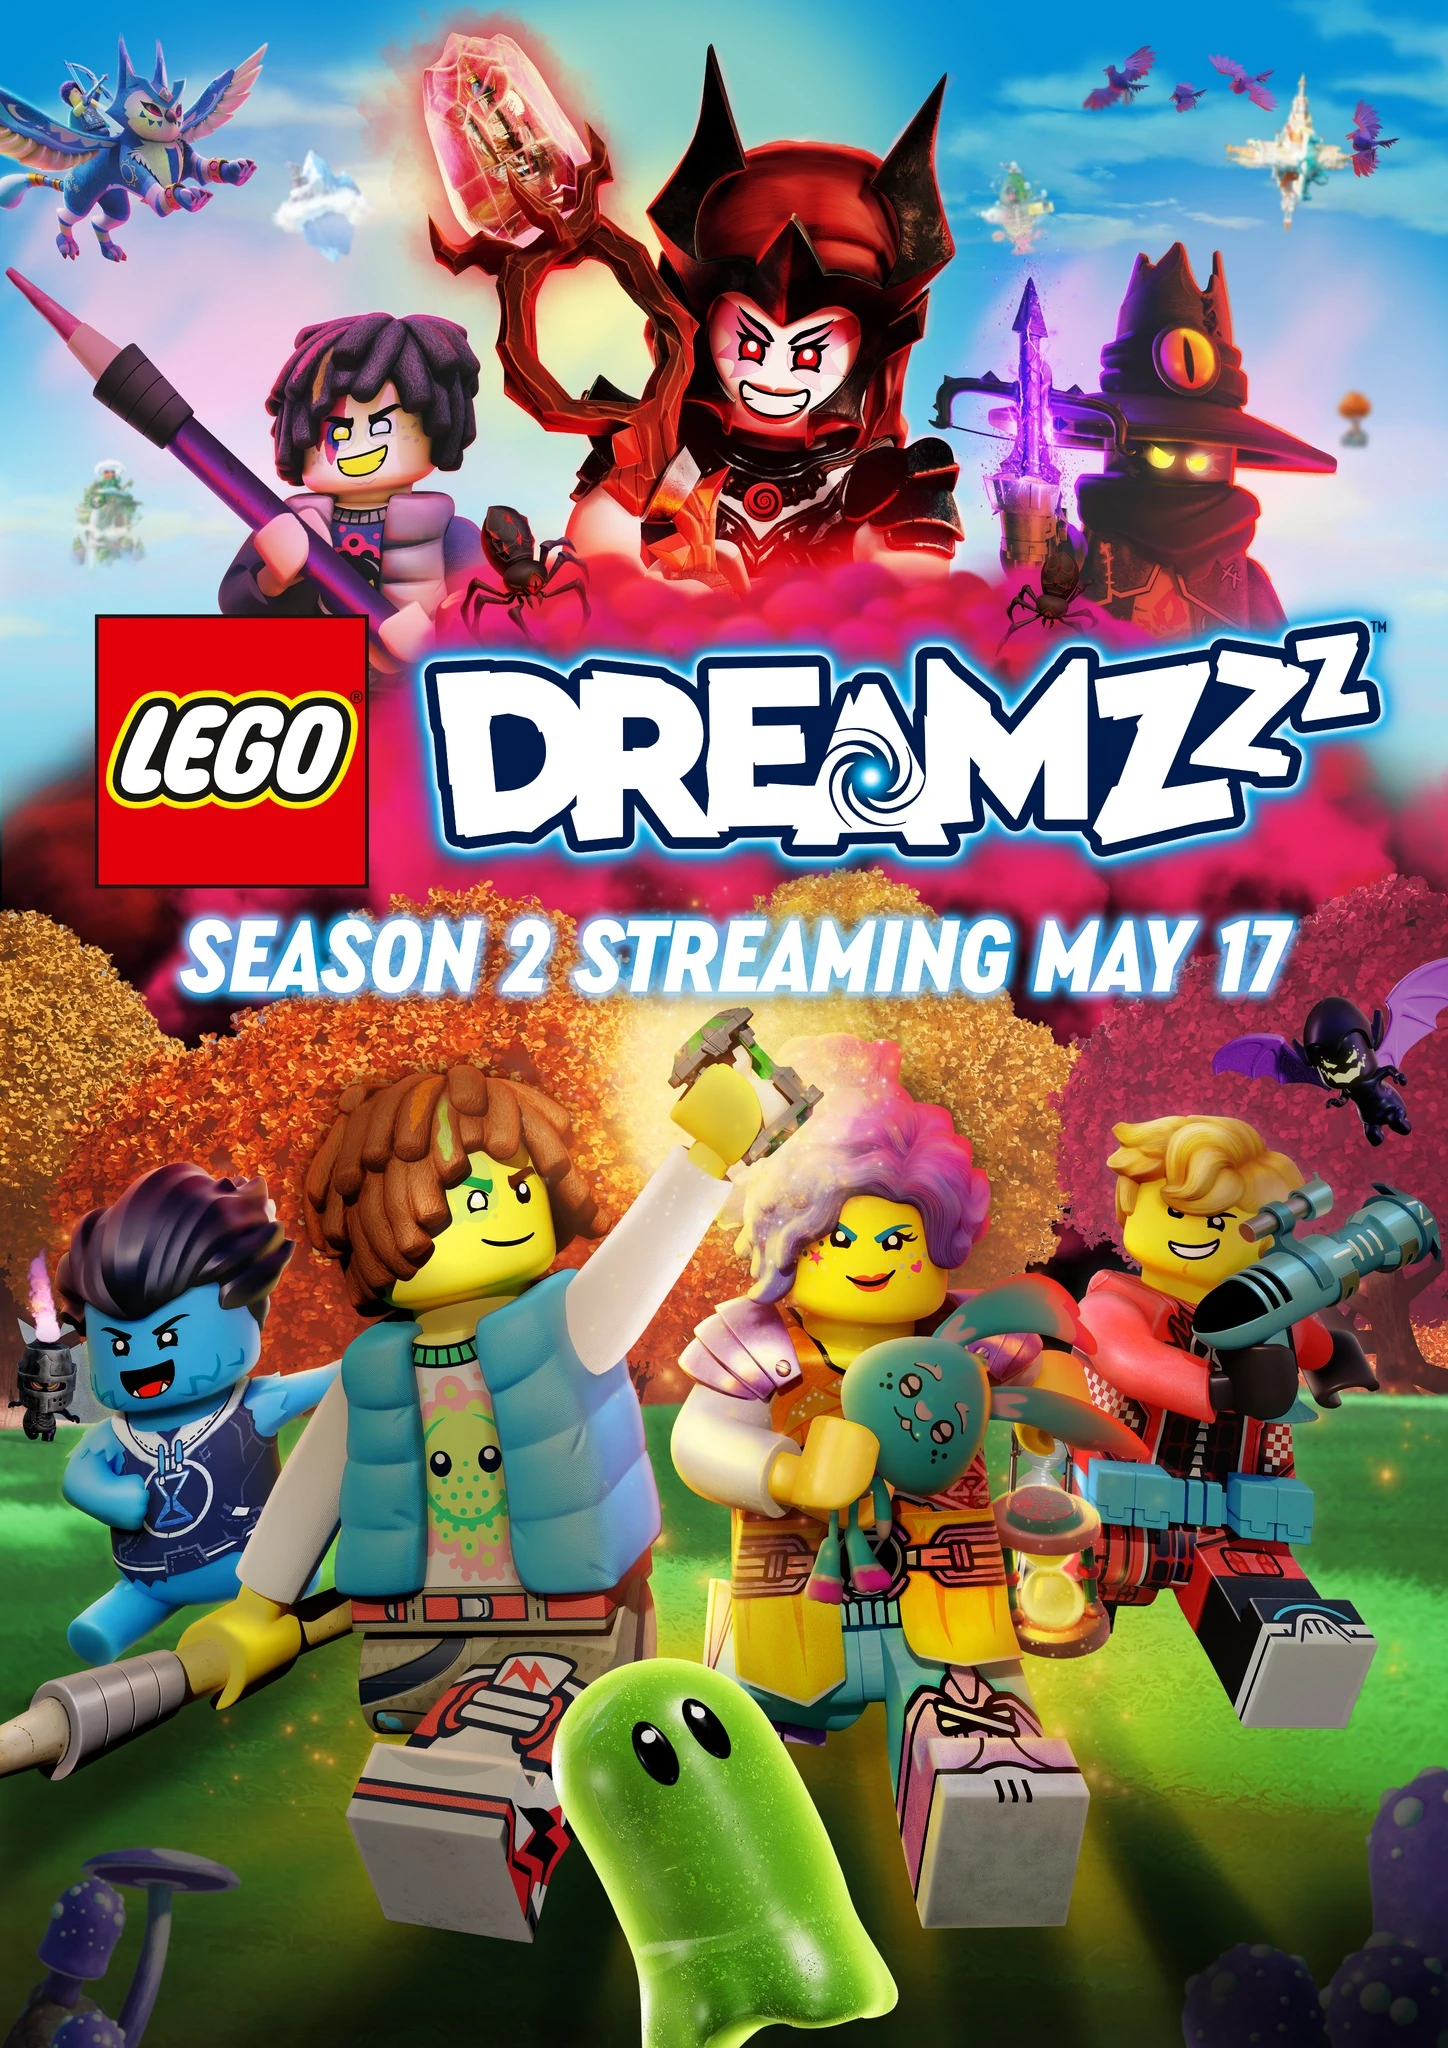 LEGO Dreamzzz – Night of the Never Witch Episode 10